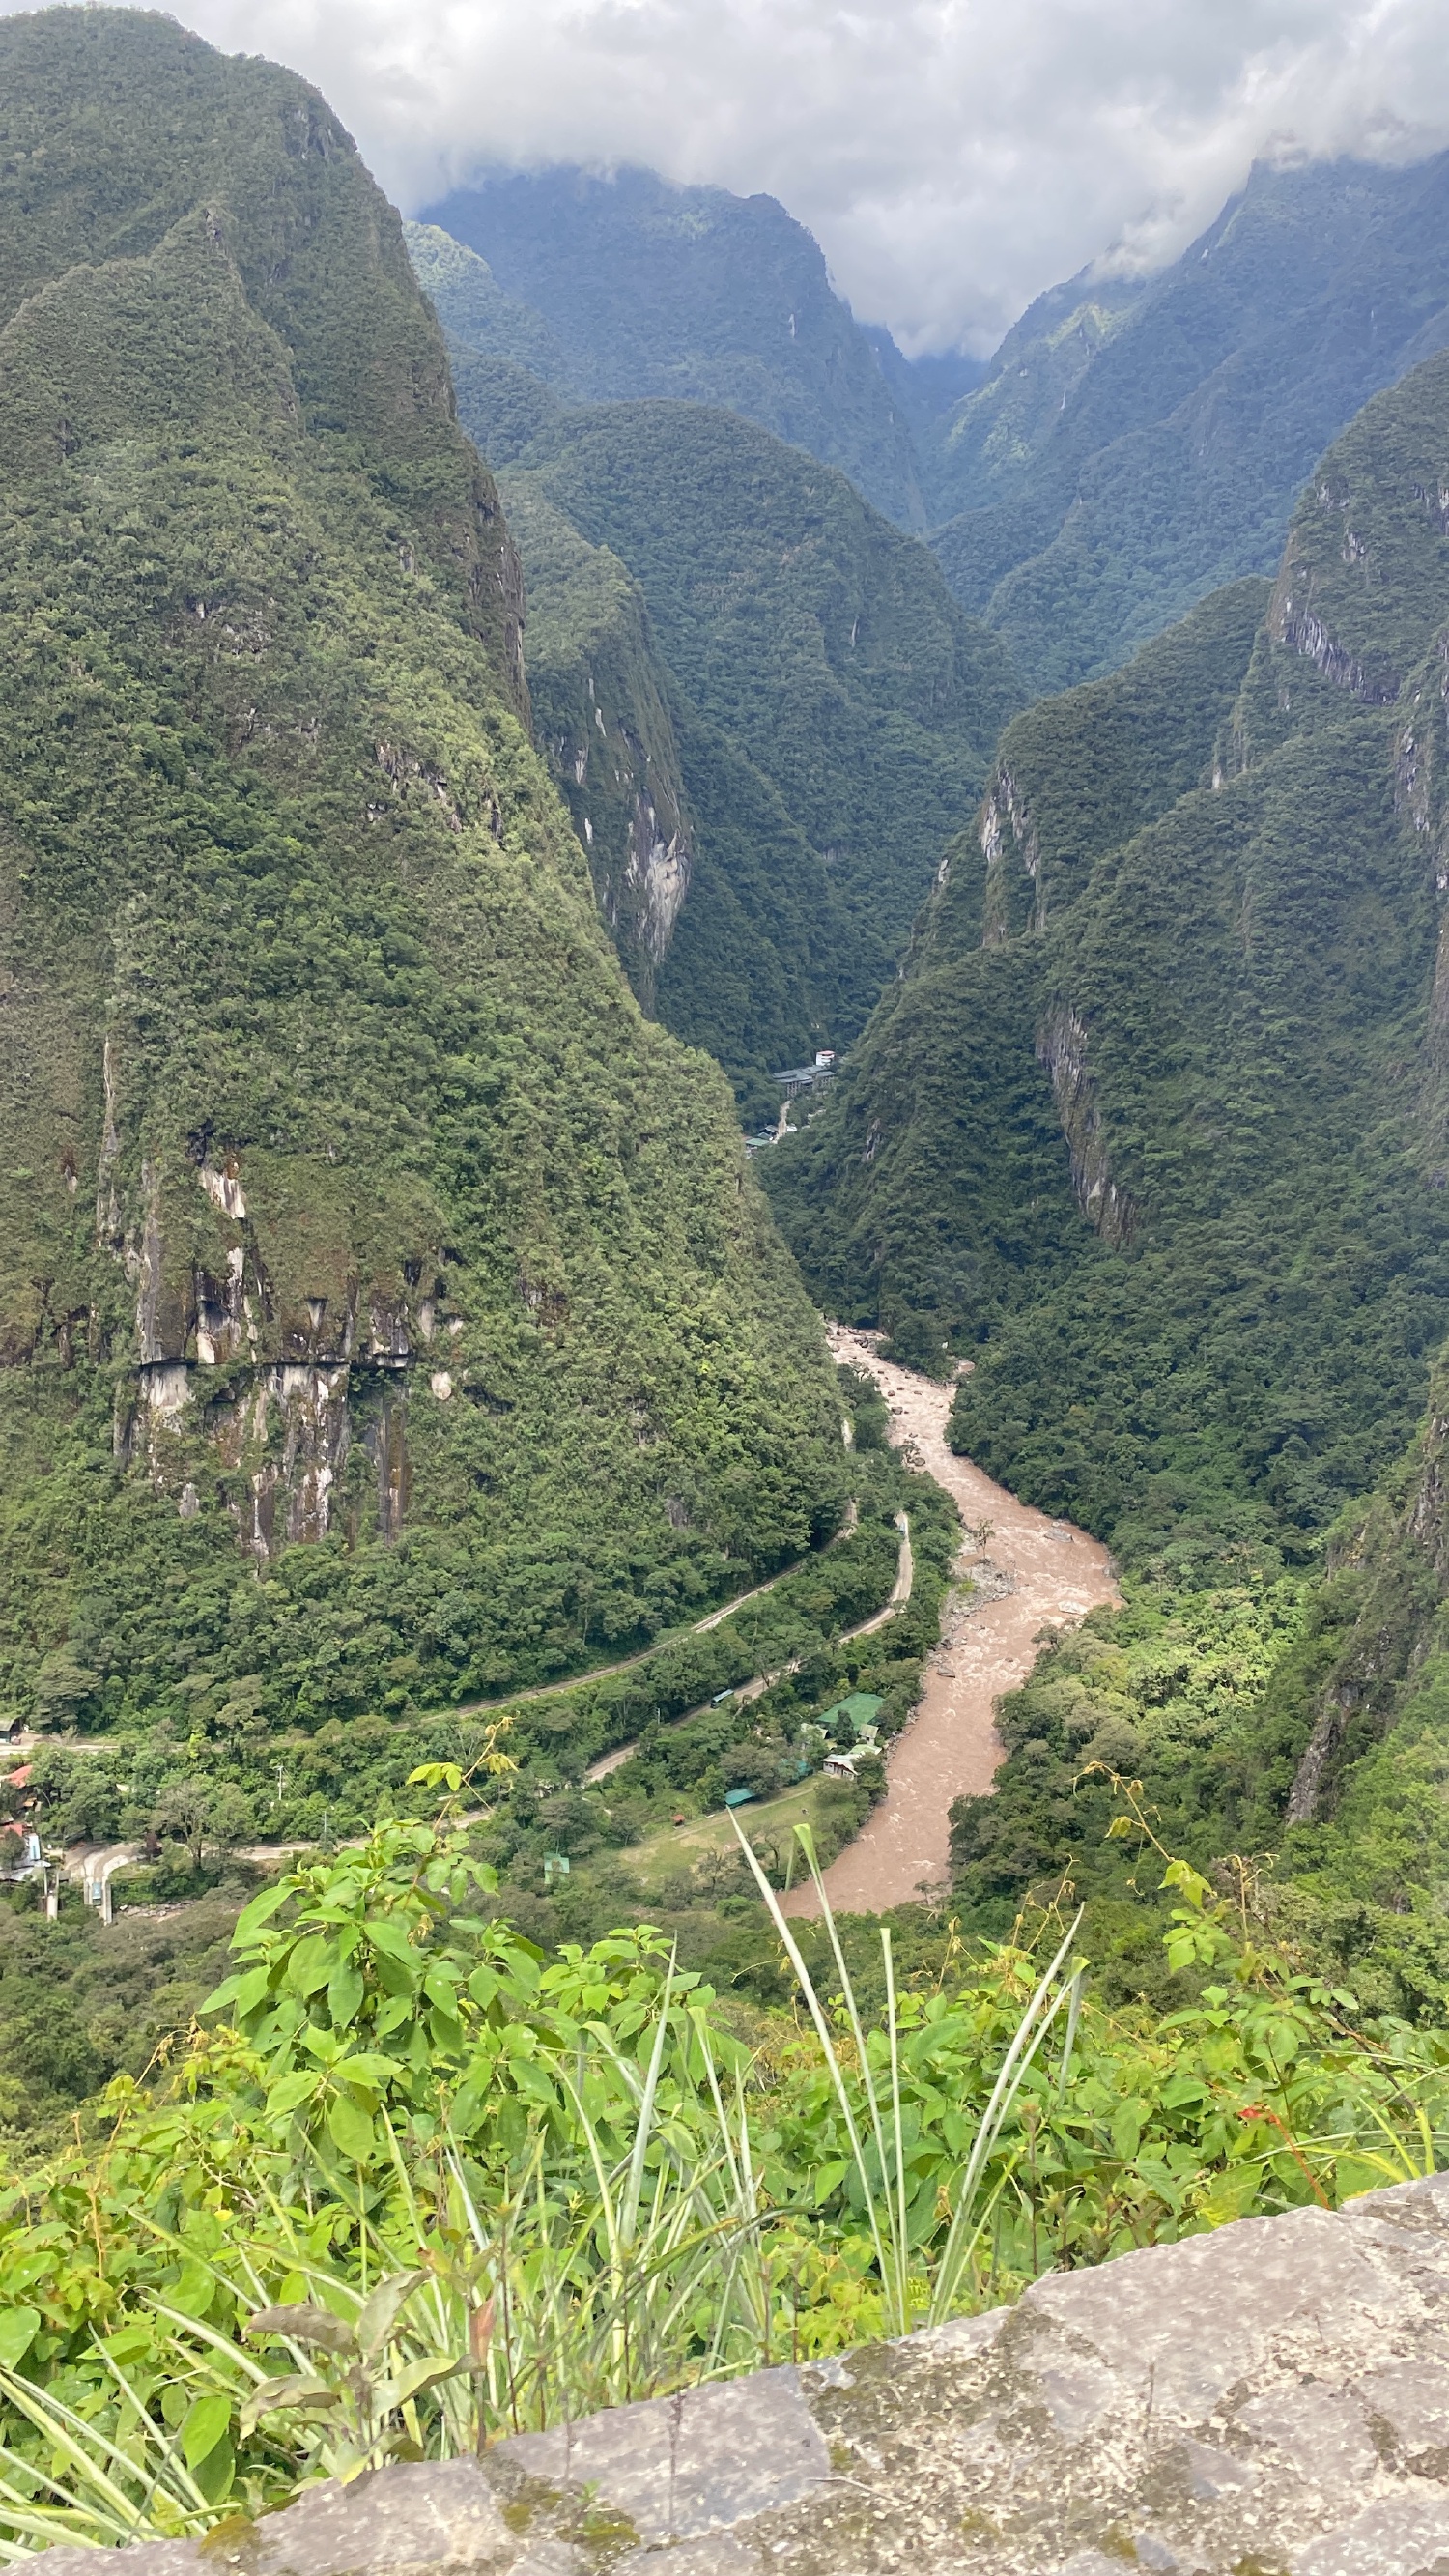 It took a long time for humanity to rediscover Machu Picchu since it was so hidden up in the mountains, through thick forests and strong river currents!